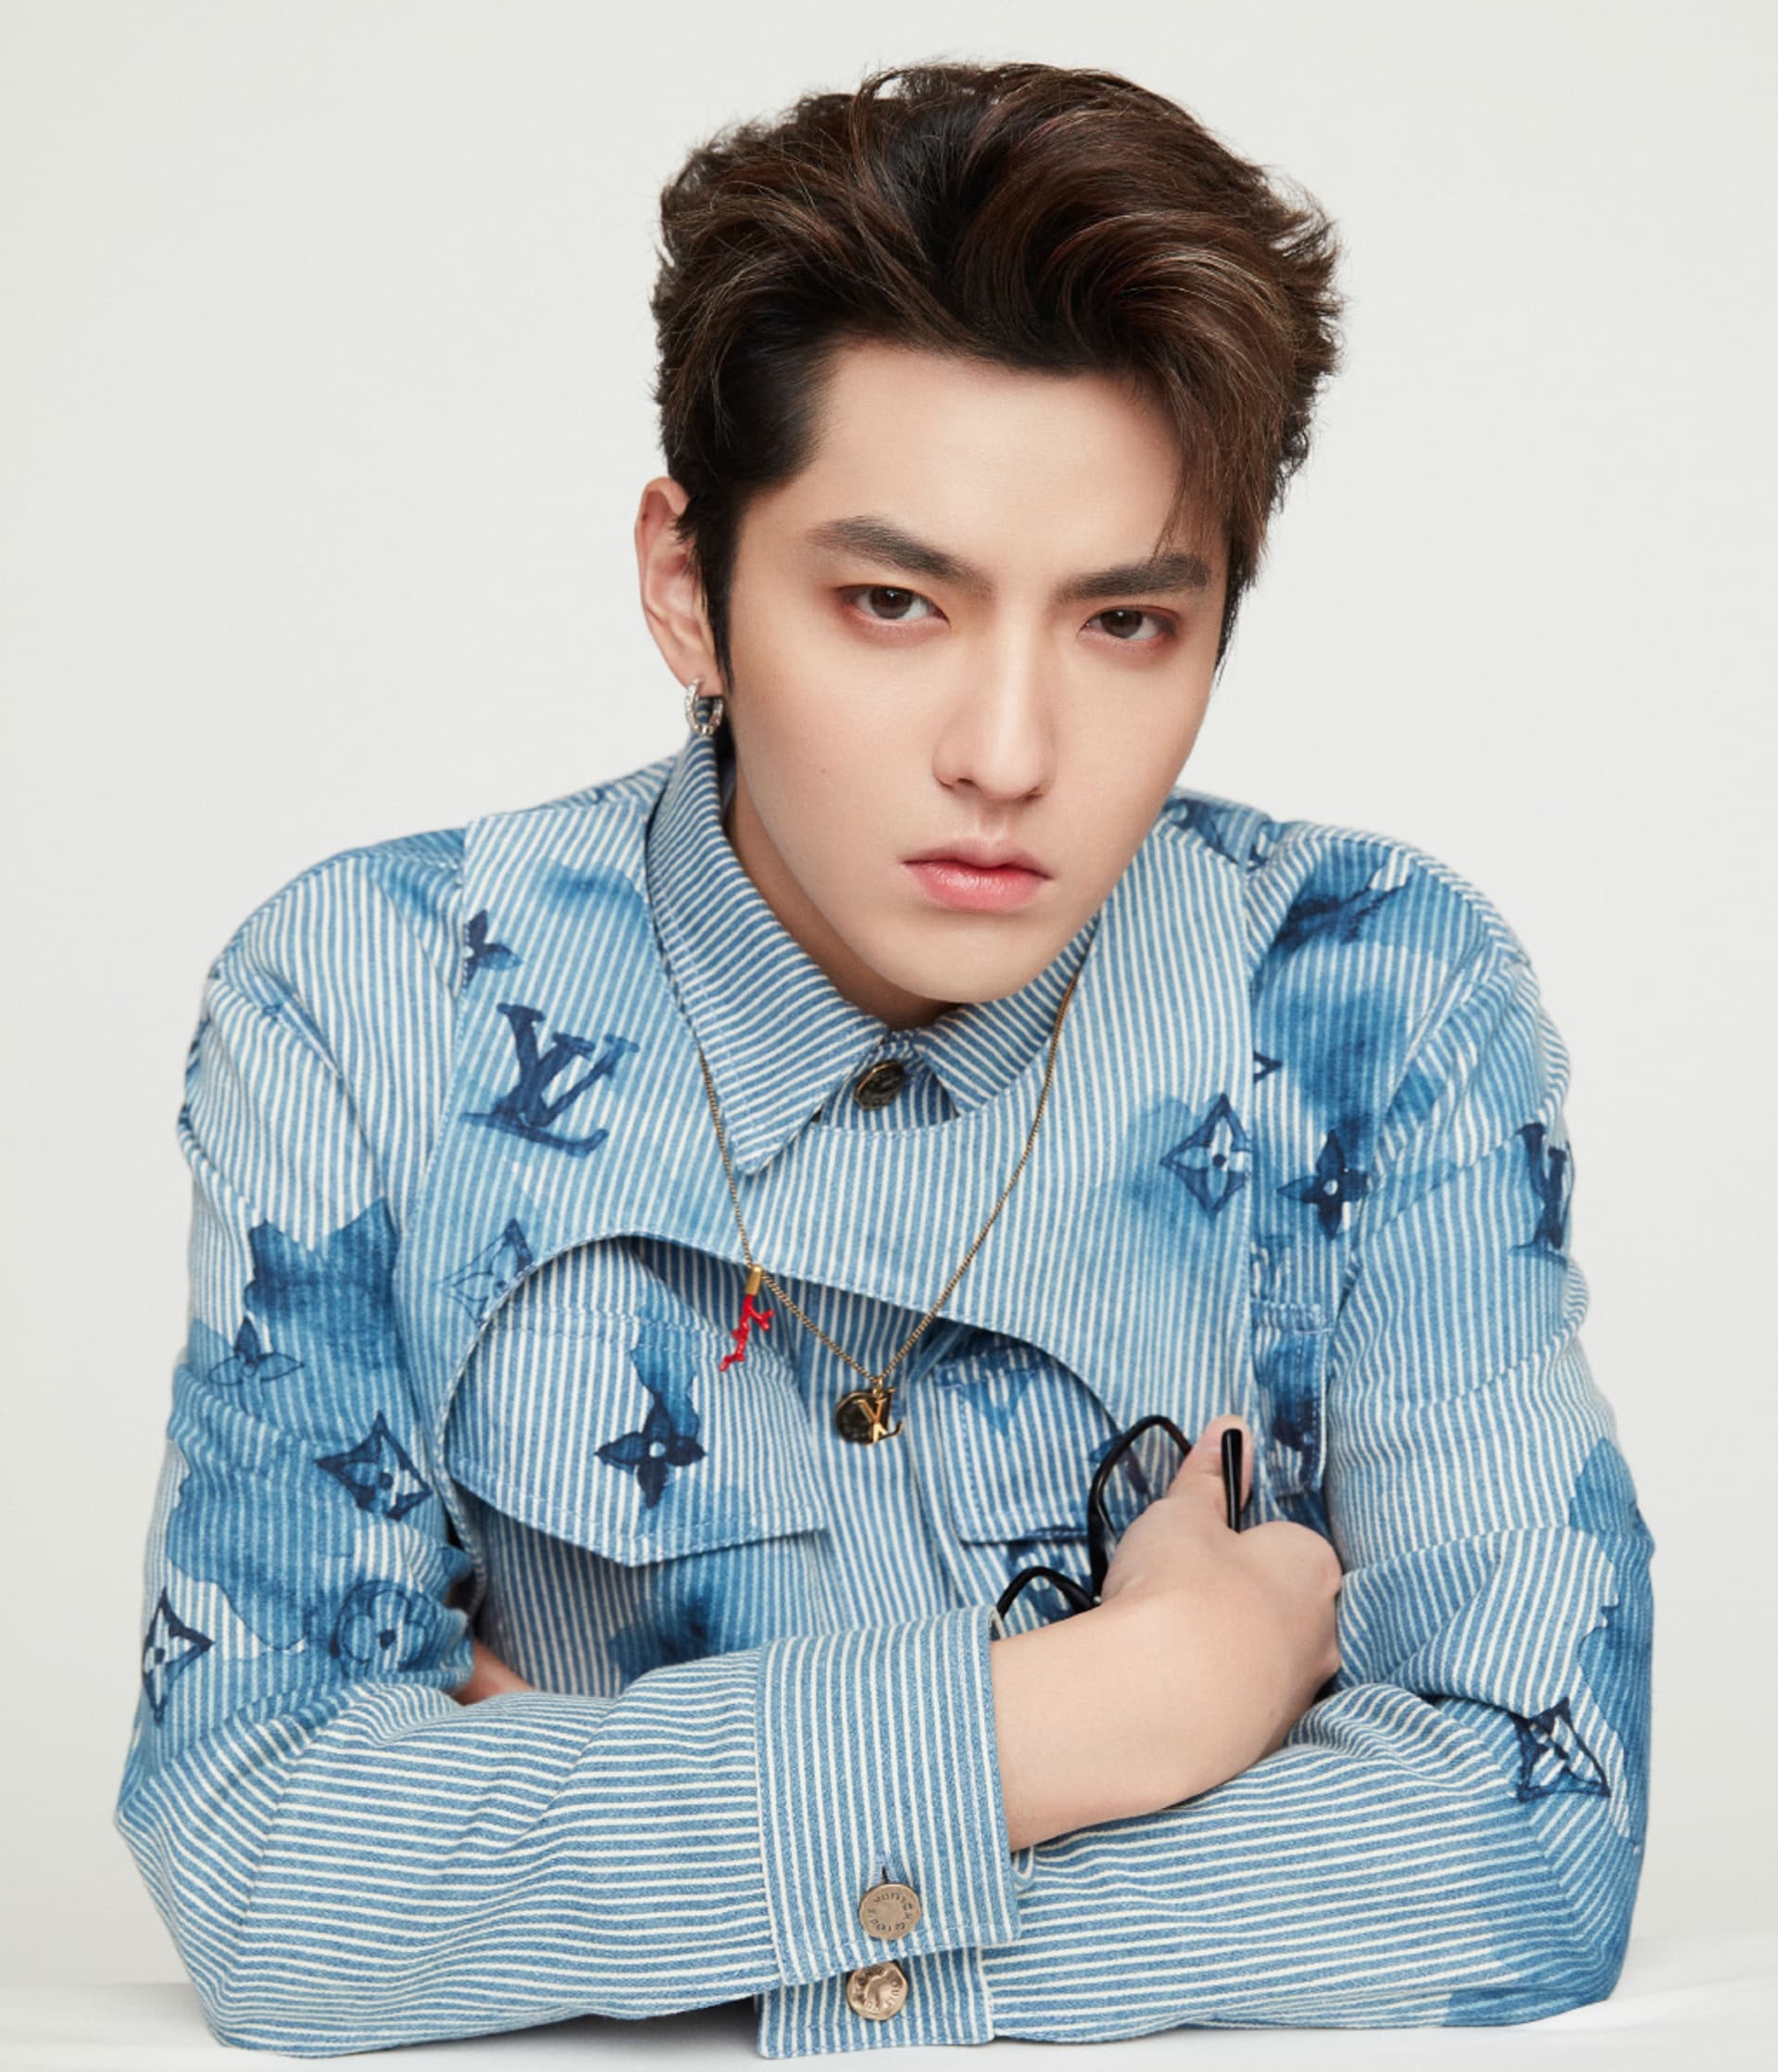 six. — Kris Wu: More young people wanting to get into the